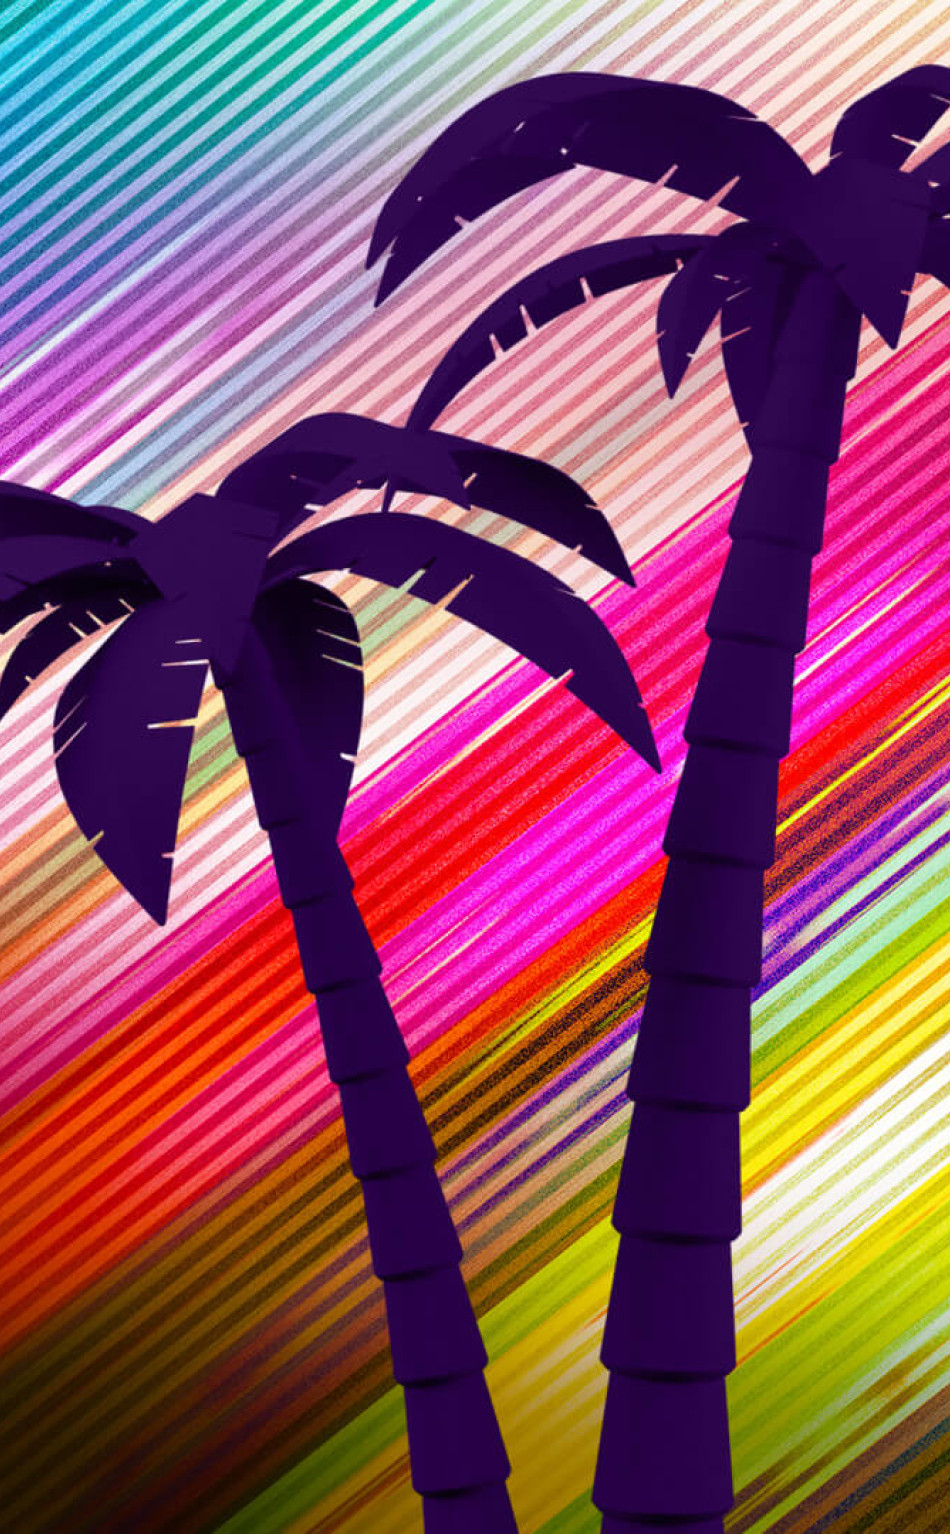 A couple of palm trees in front - Vaporwave